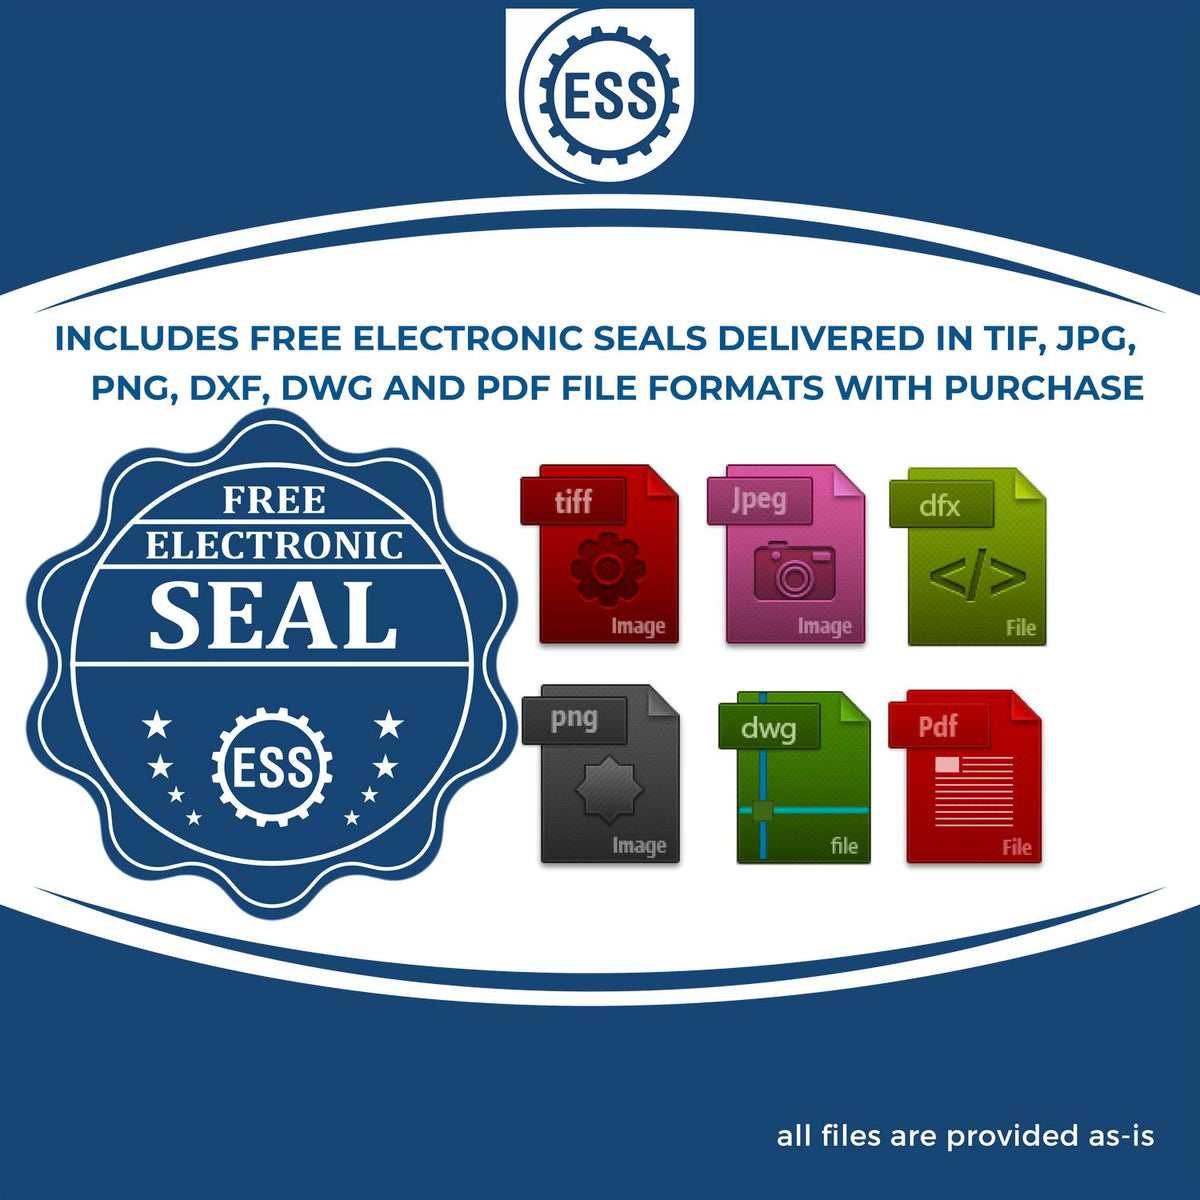 An infographic for the free electronic seal for the Slim Pre-Inked North Carolina Professional Geologist Seal Stamp illustrating the different file type icons such as DXF, DWG, TIF, JPG and PNG.